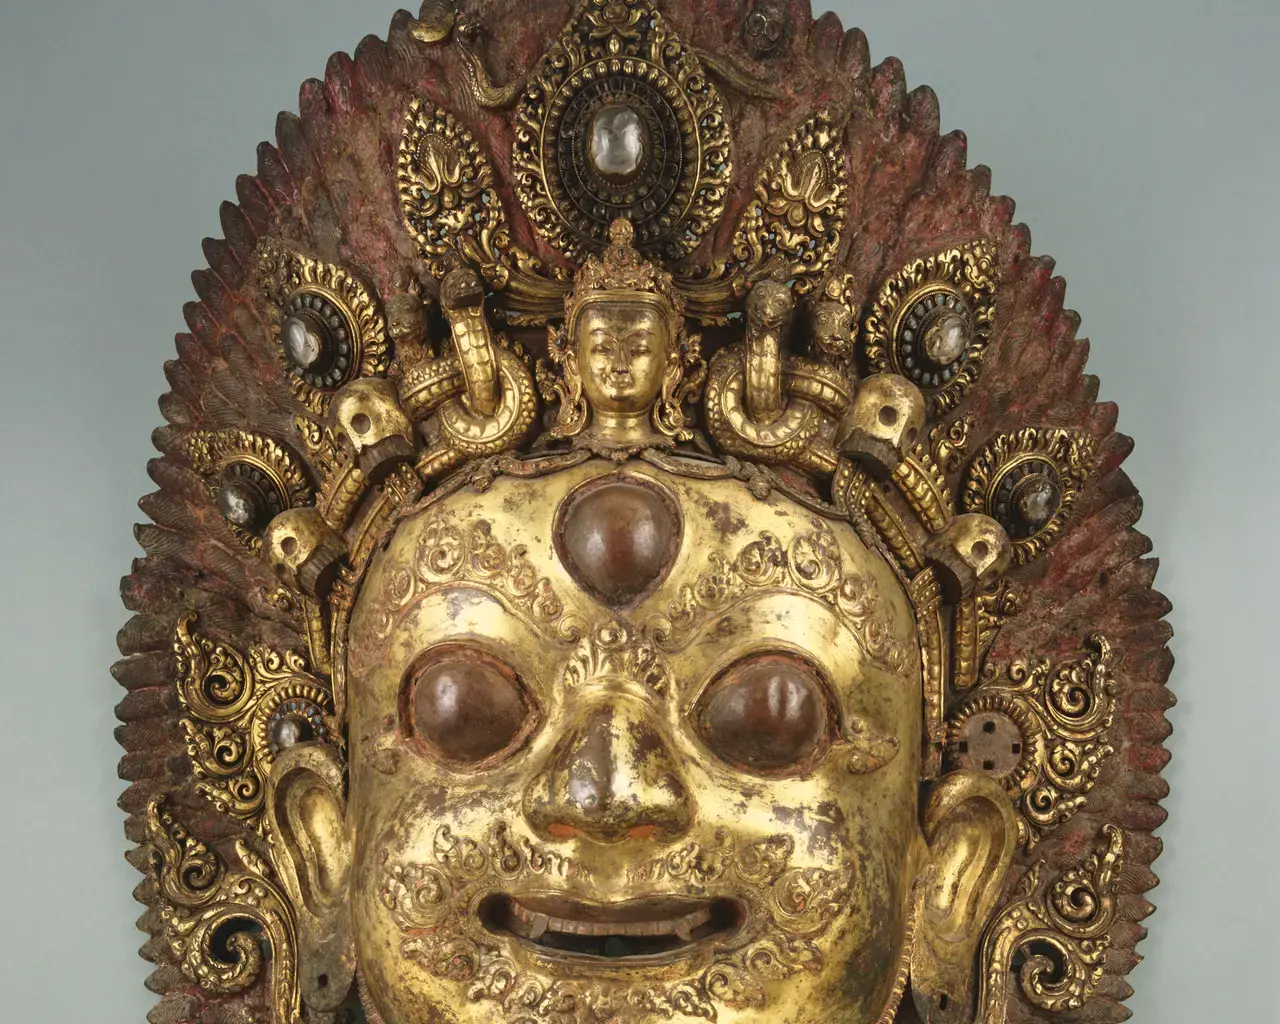 Artist unknown, Processional Face of the God Bhairava, c. 16th century, mercury-gilded copper alloy with rock crystal, paint, foil, and glass decoration. Photo courtesy of the Philadelphia Museum of Art.